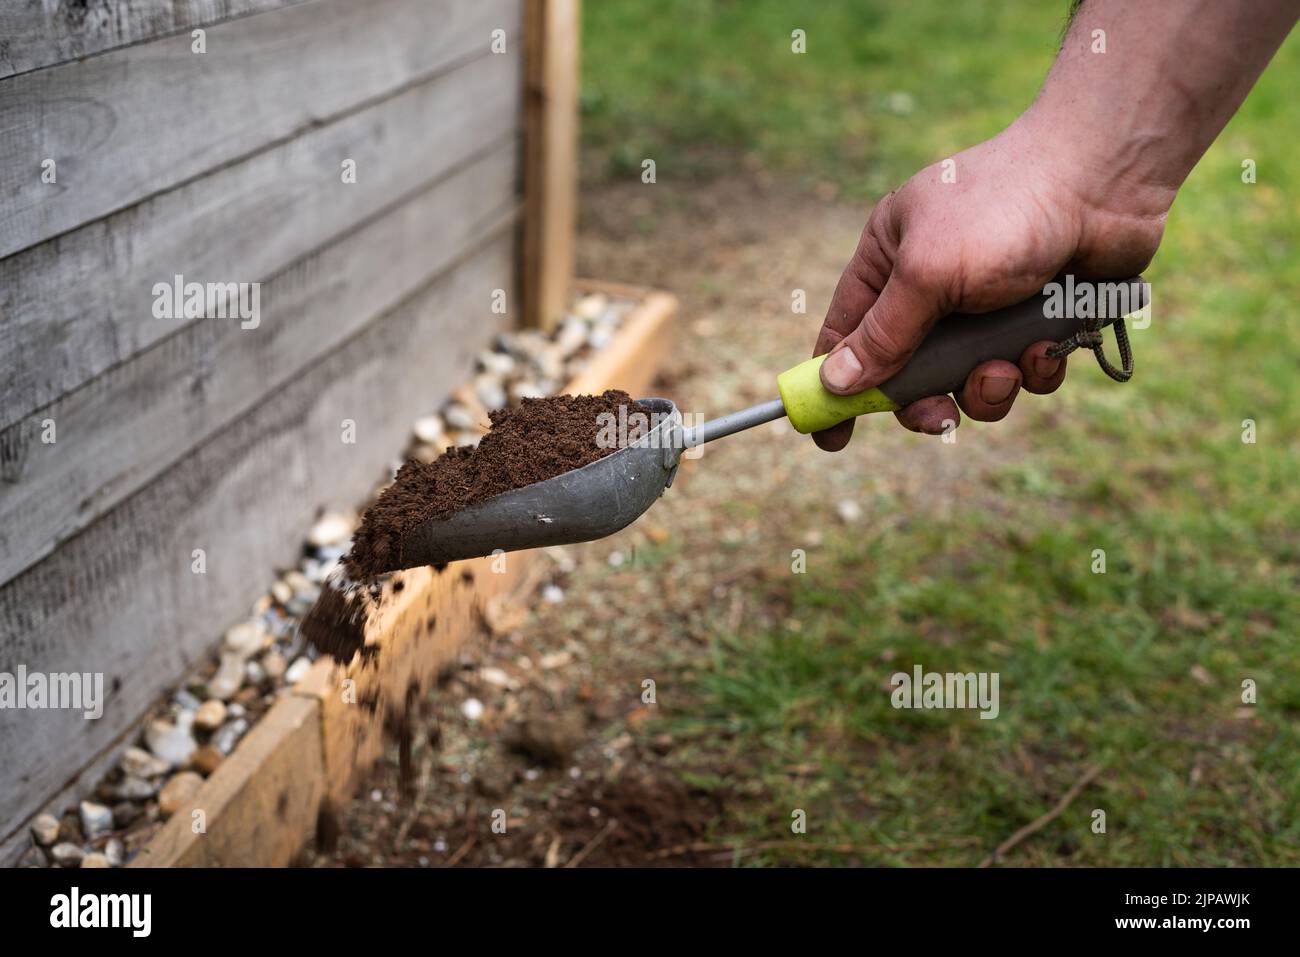 Male gardener holding scoop trowel full of soil, spreading soil out on grass patch on ground. Close up photo.  Stock Photo